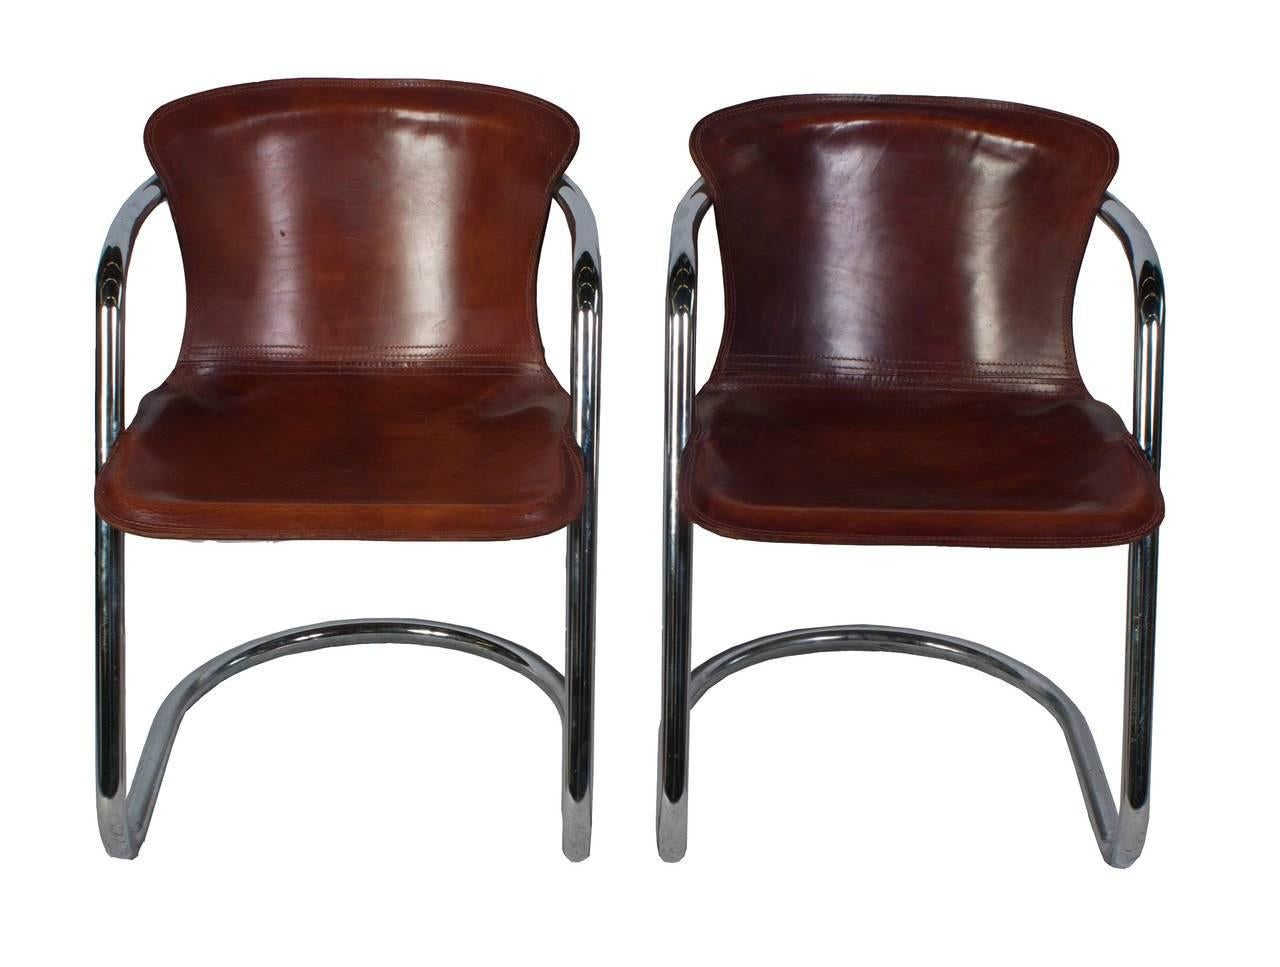 A set of Willy Rizzo dining chair with cognac leather.